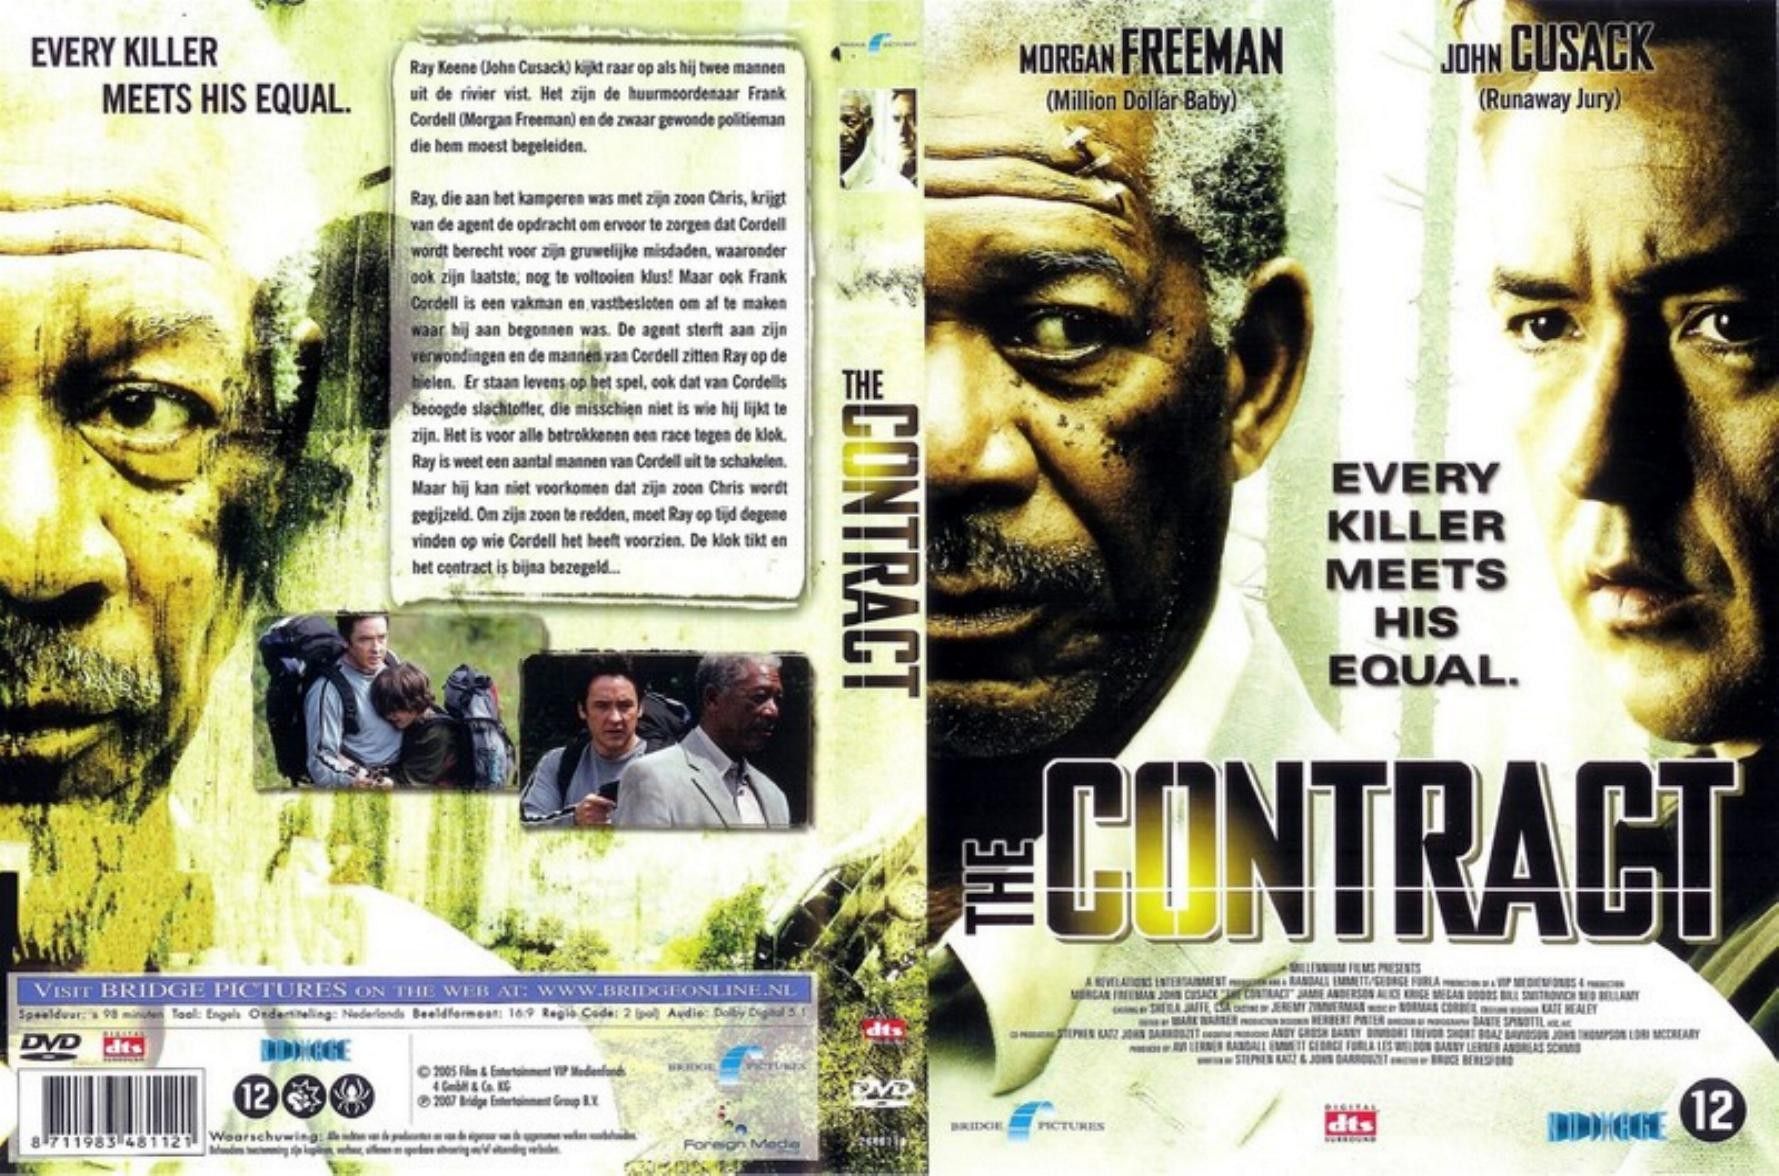 The Contract (2006)